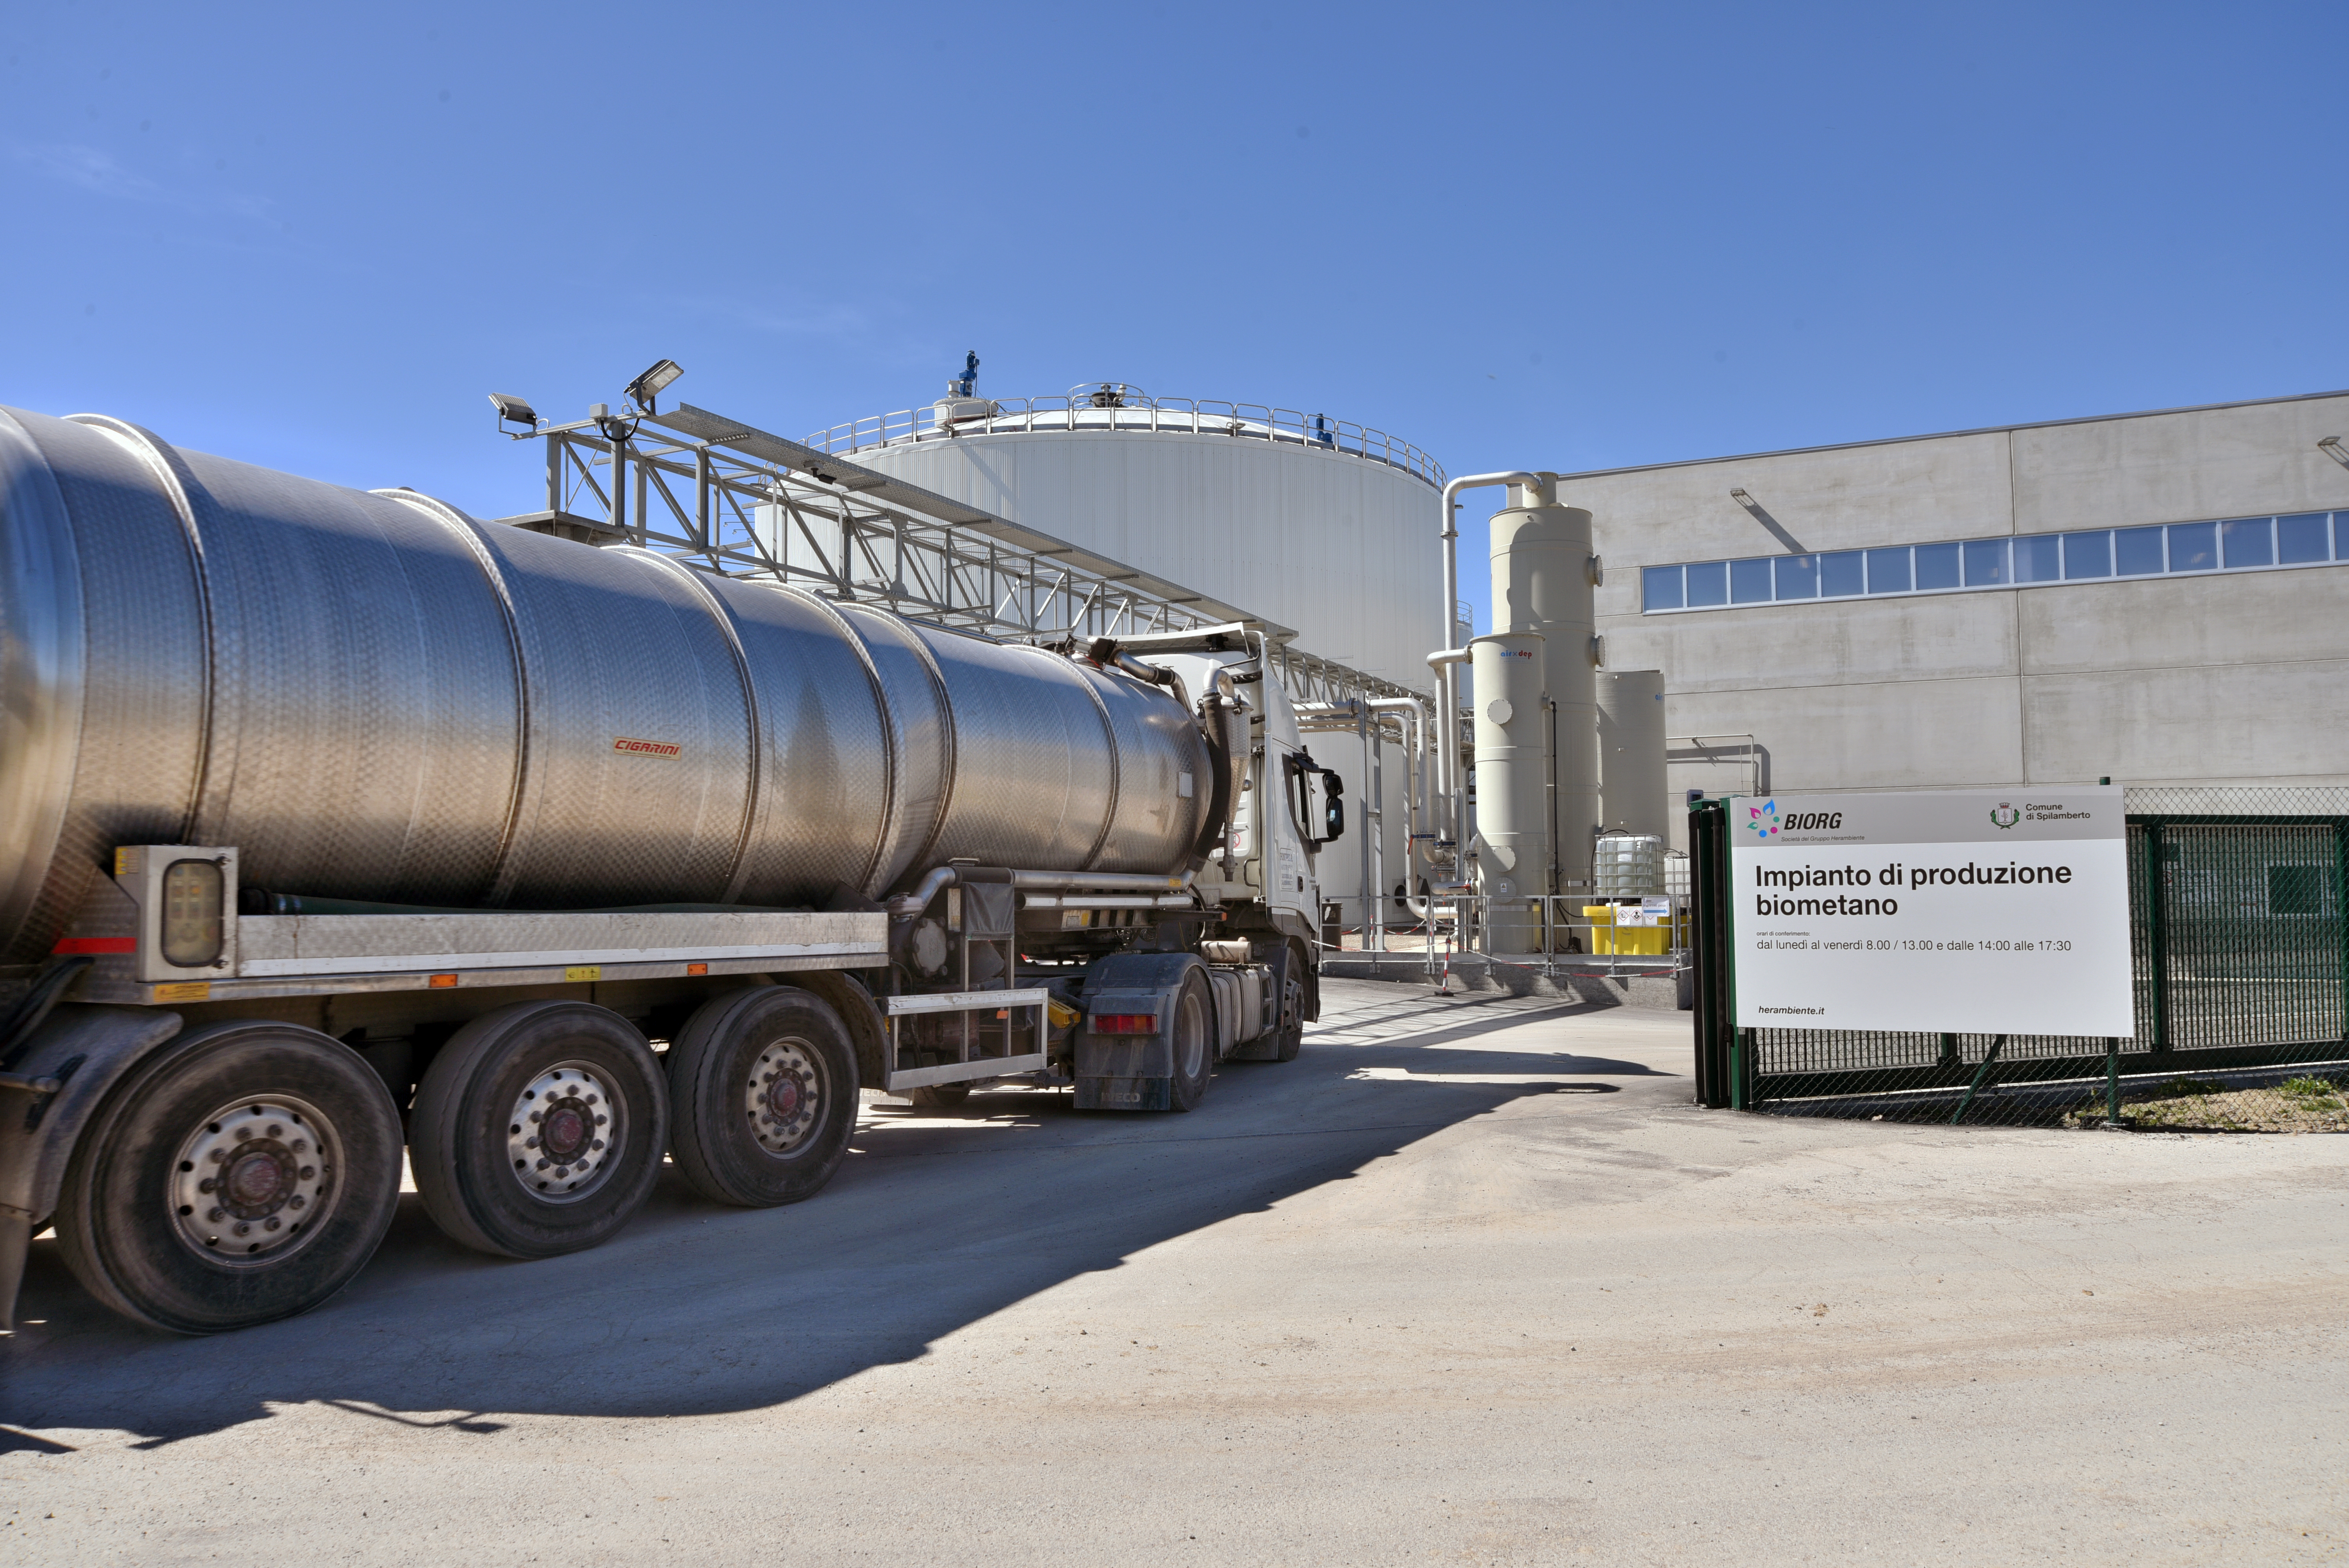 Anaerobic digestion and biomethane production plant in Spilamberto (Modena)